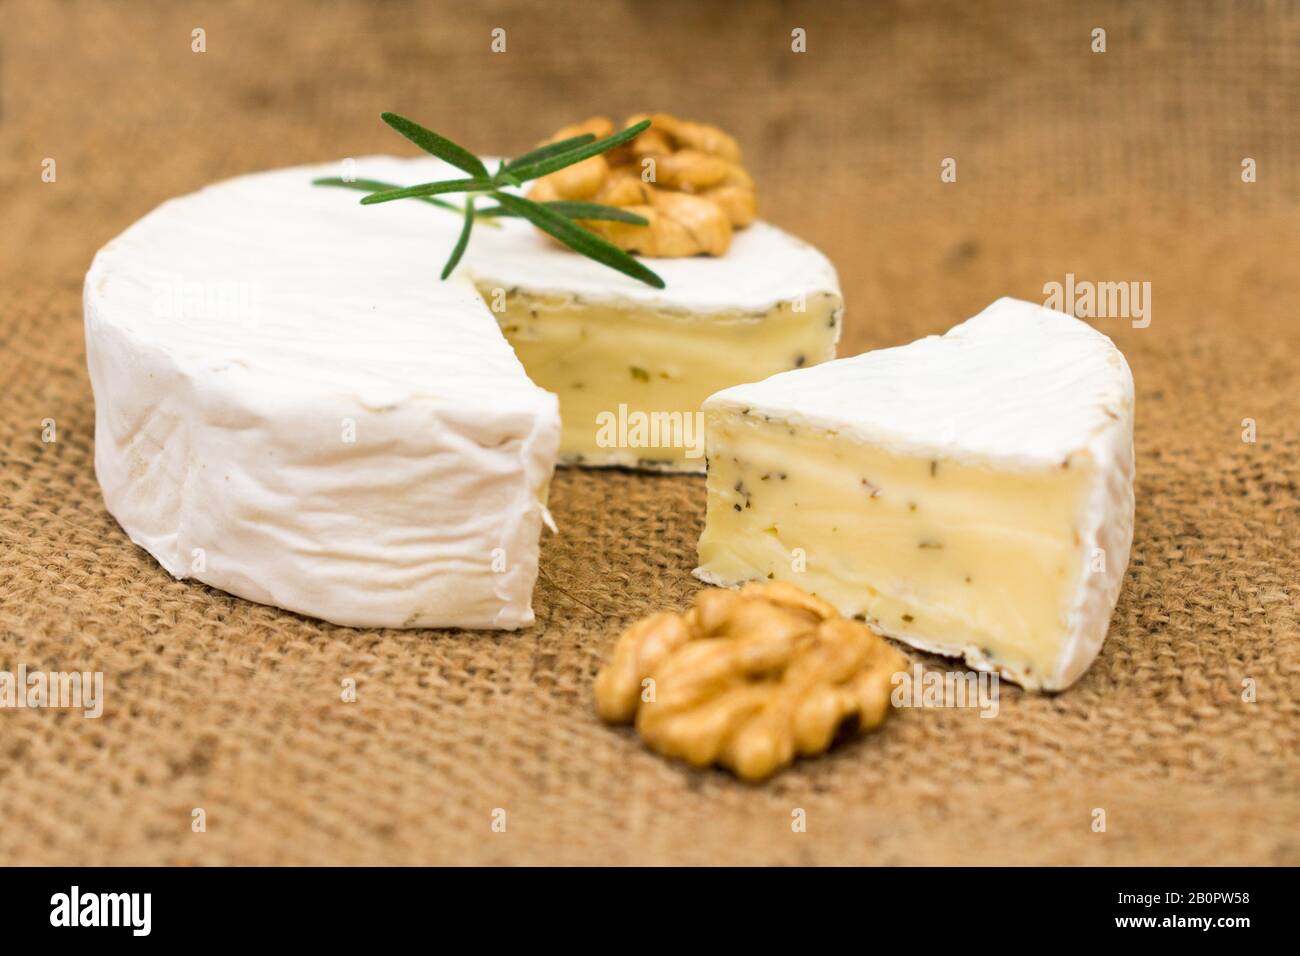 Camembert cheese with walnuts and rosemary. Close-up. Stock Photo